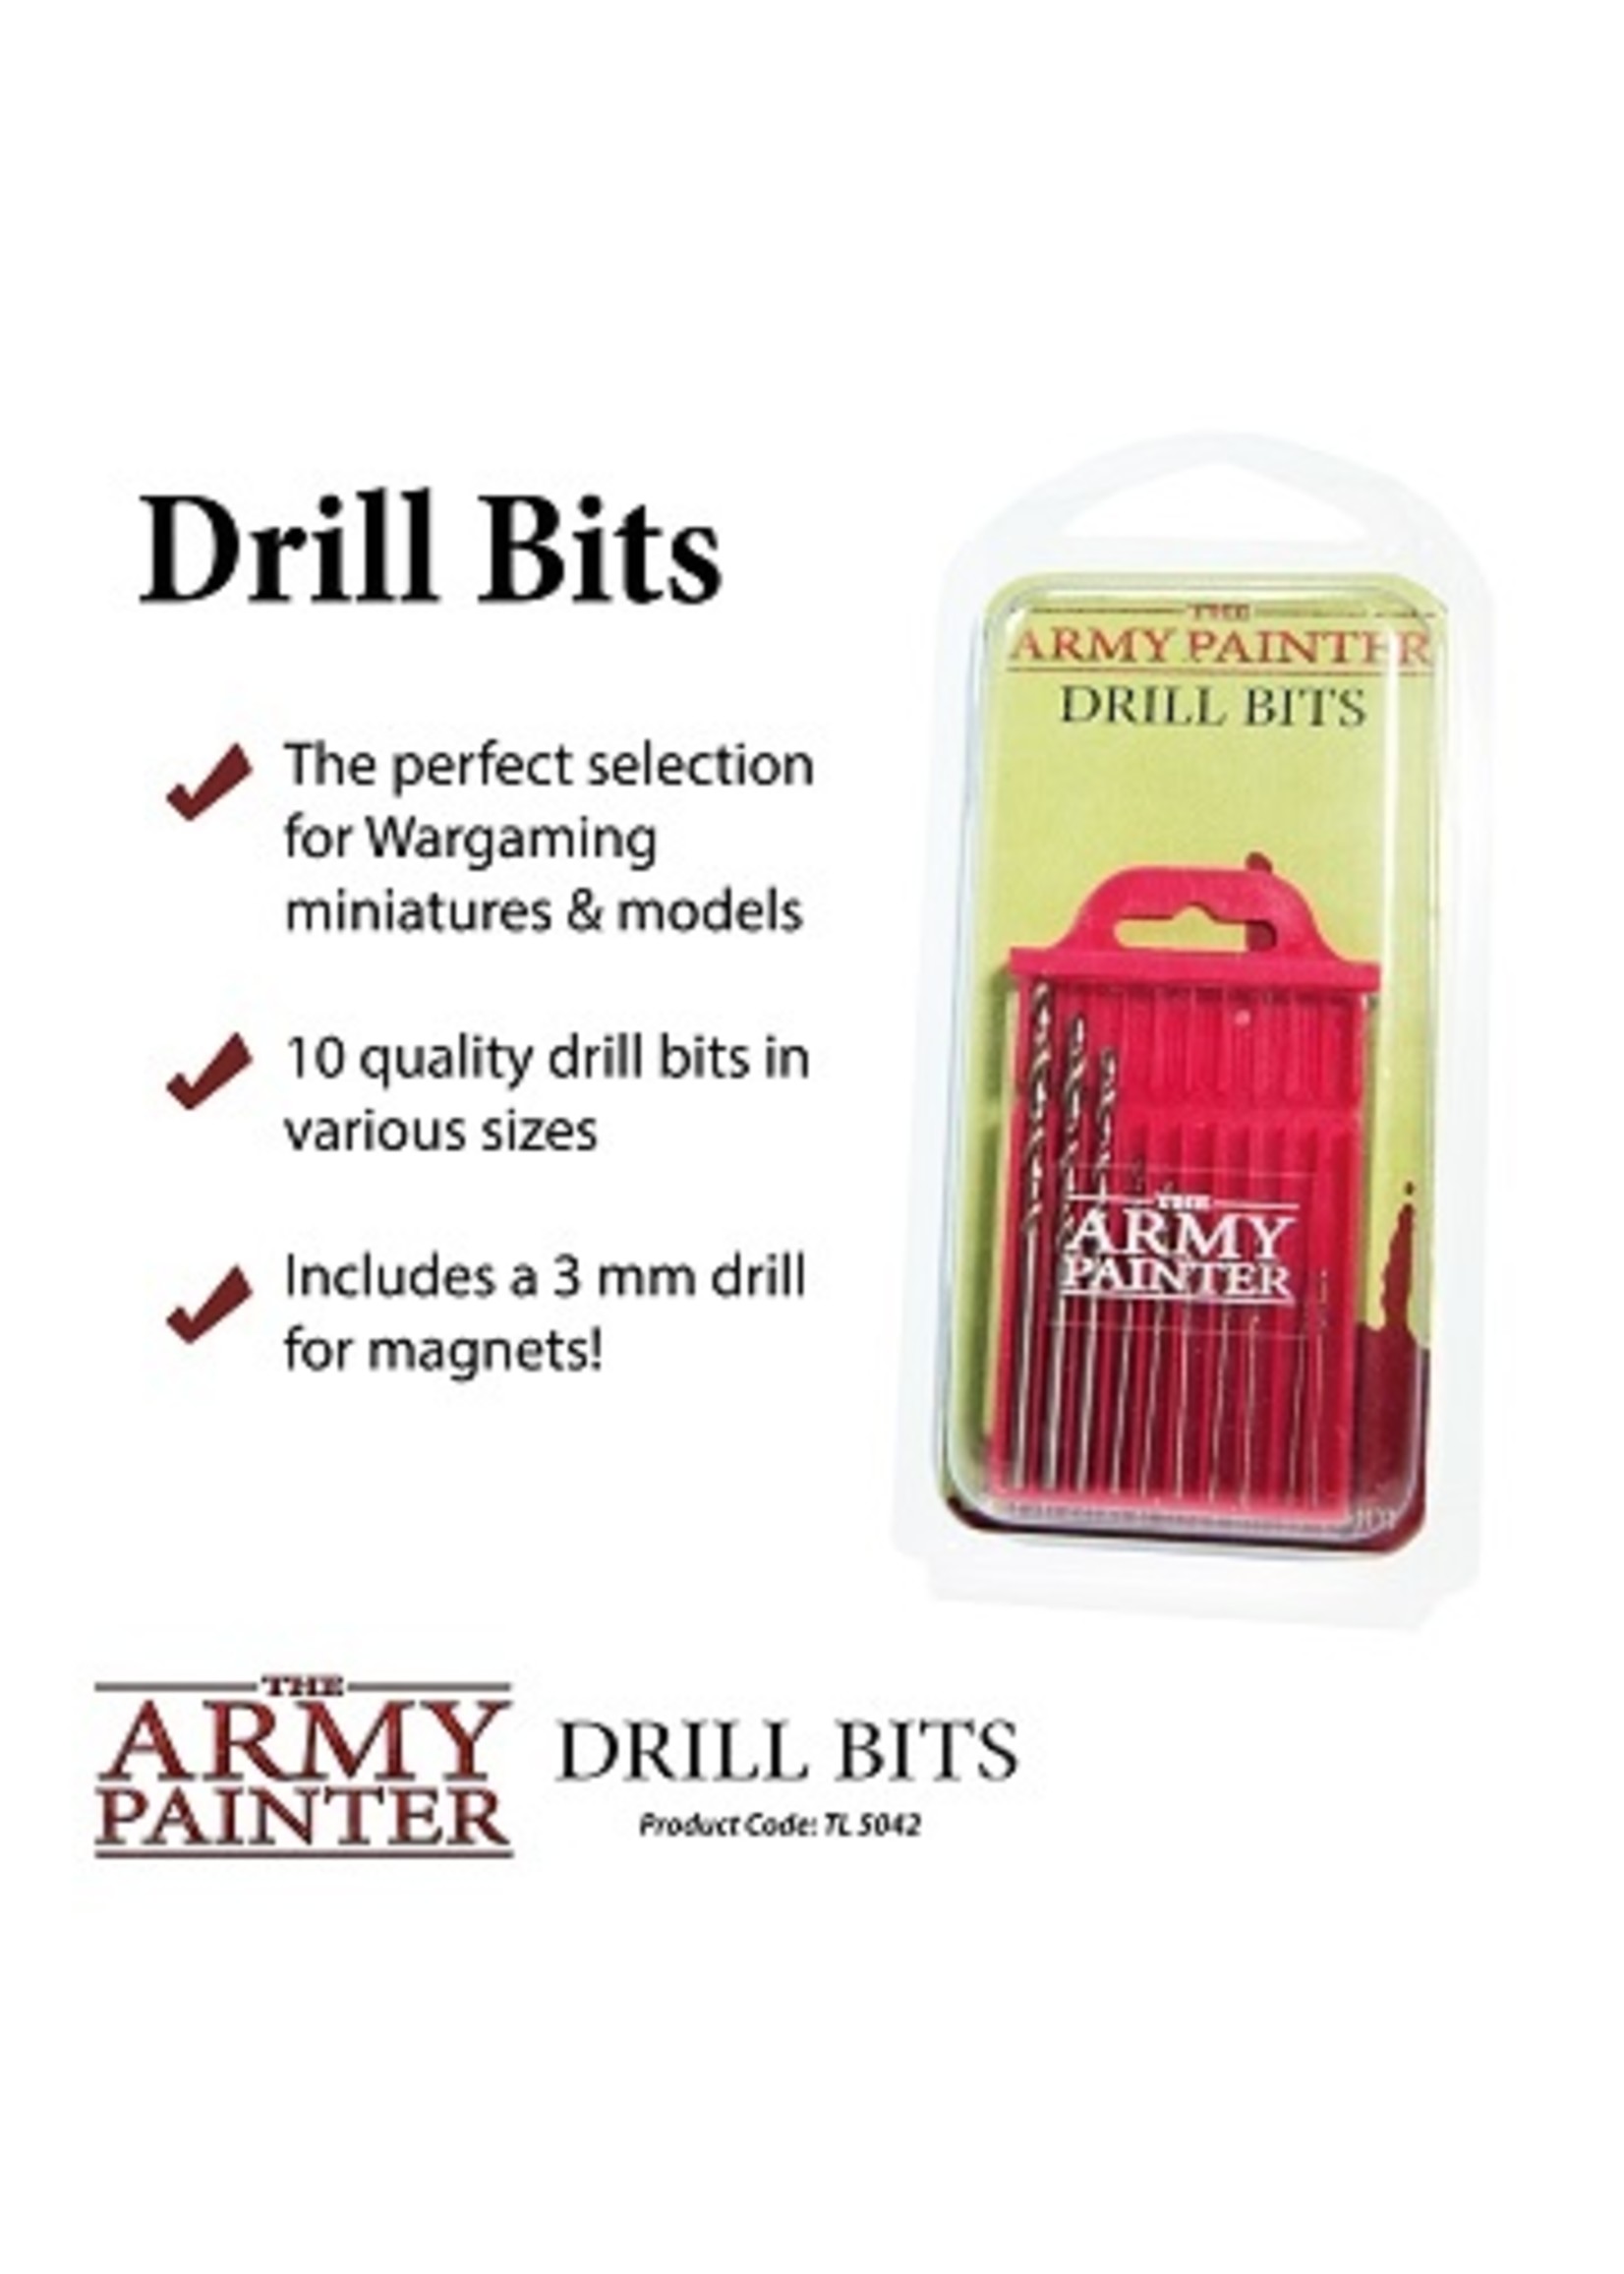 Drill Bits - The Army Painter